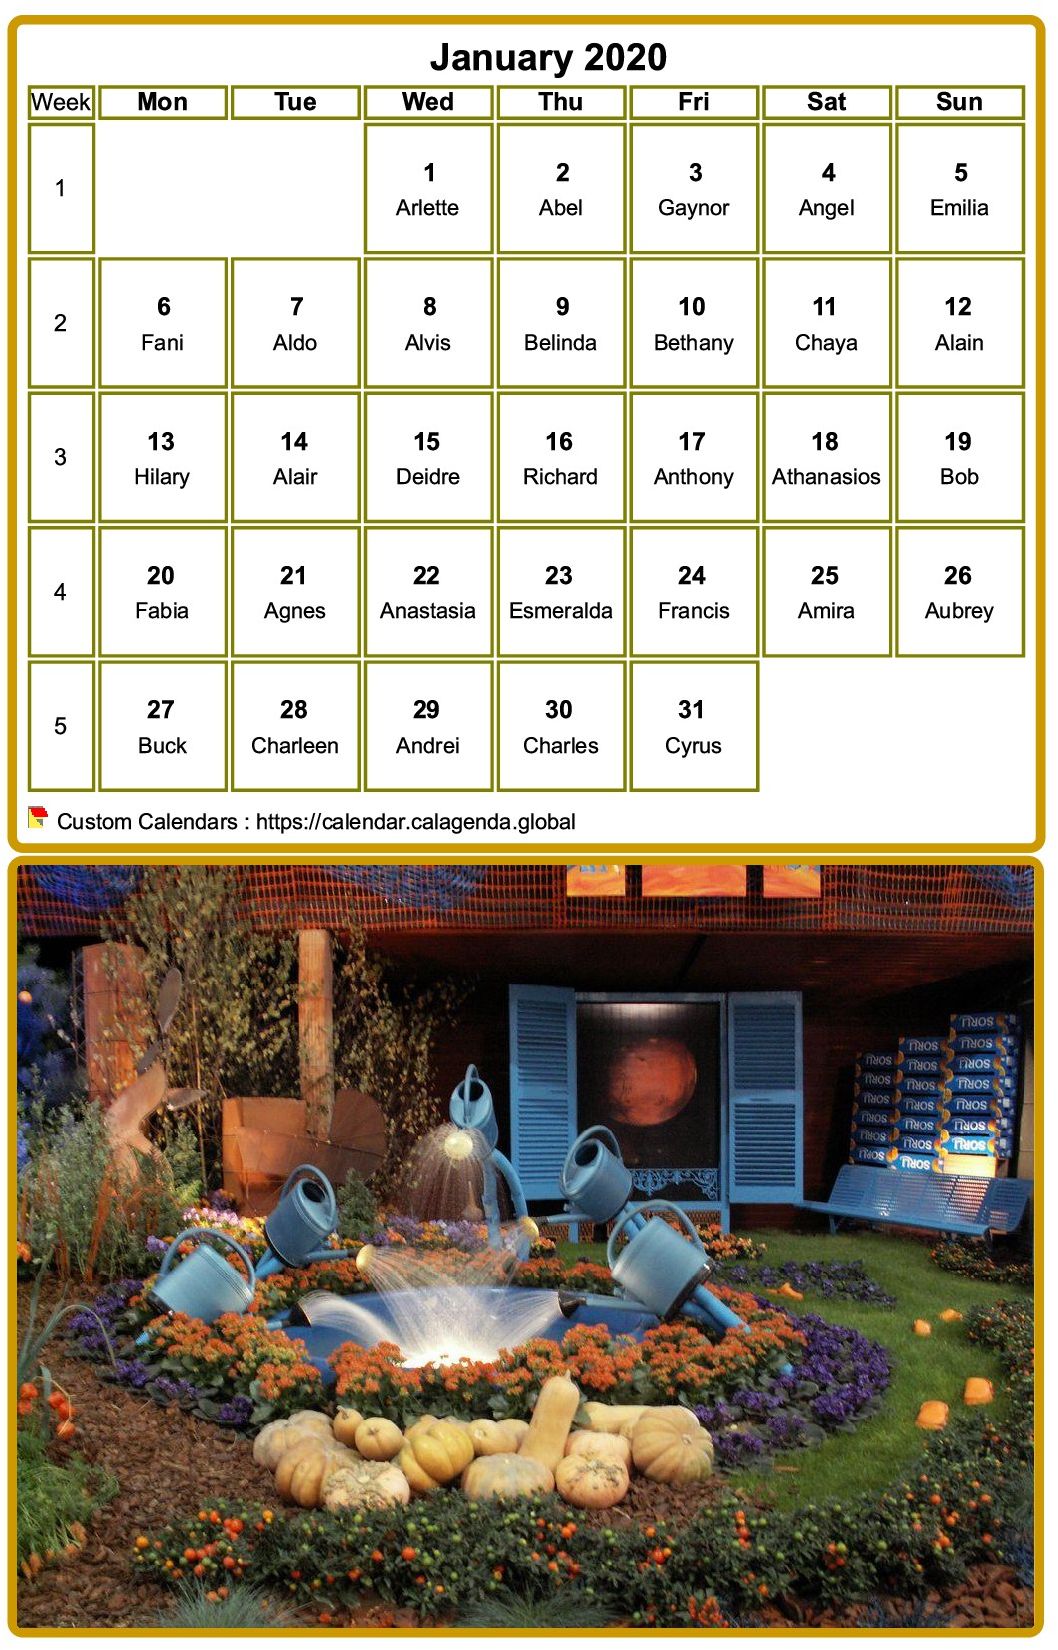 Calendar monthly 2020 to print, with photograph in underside